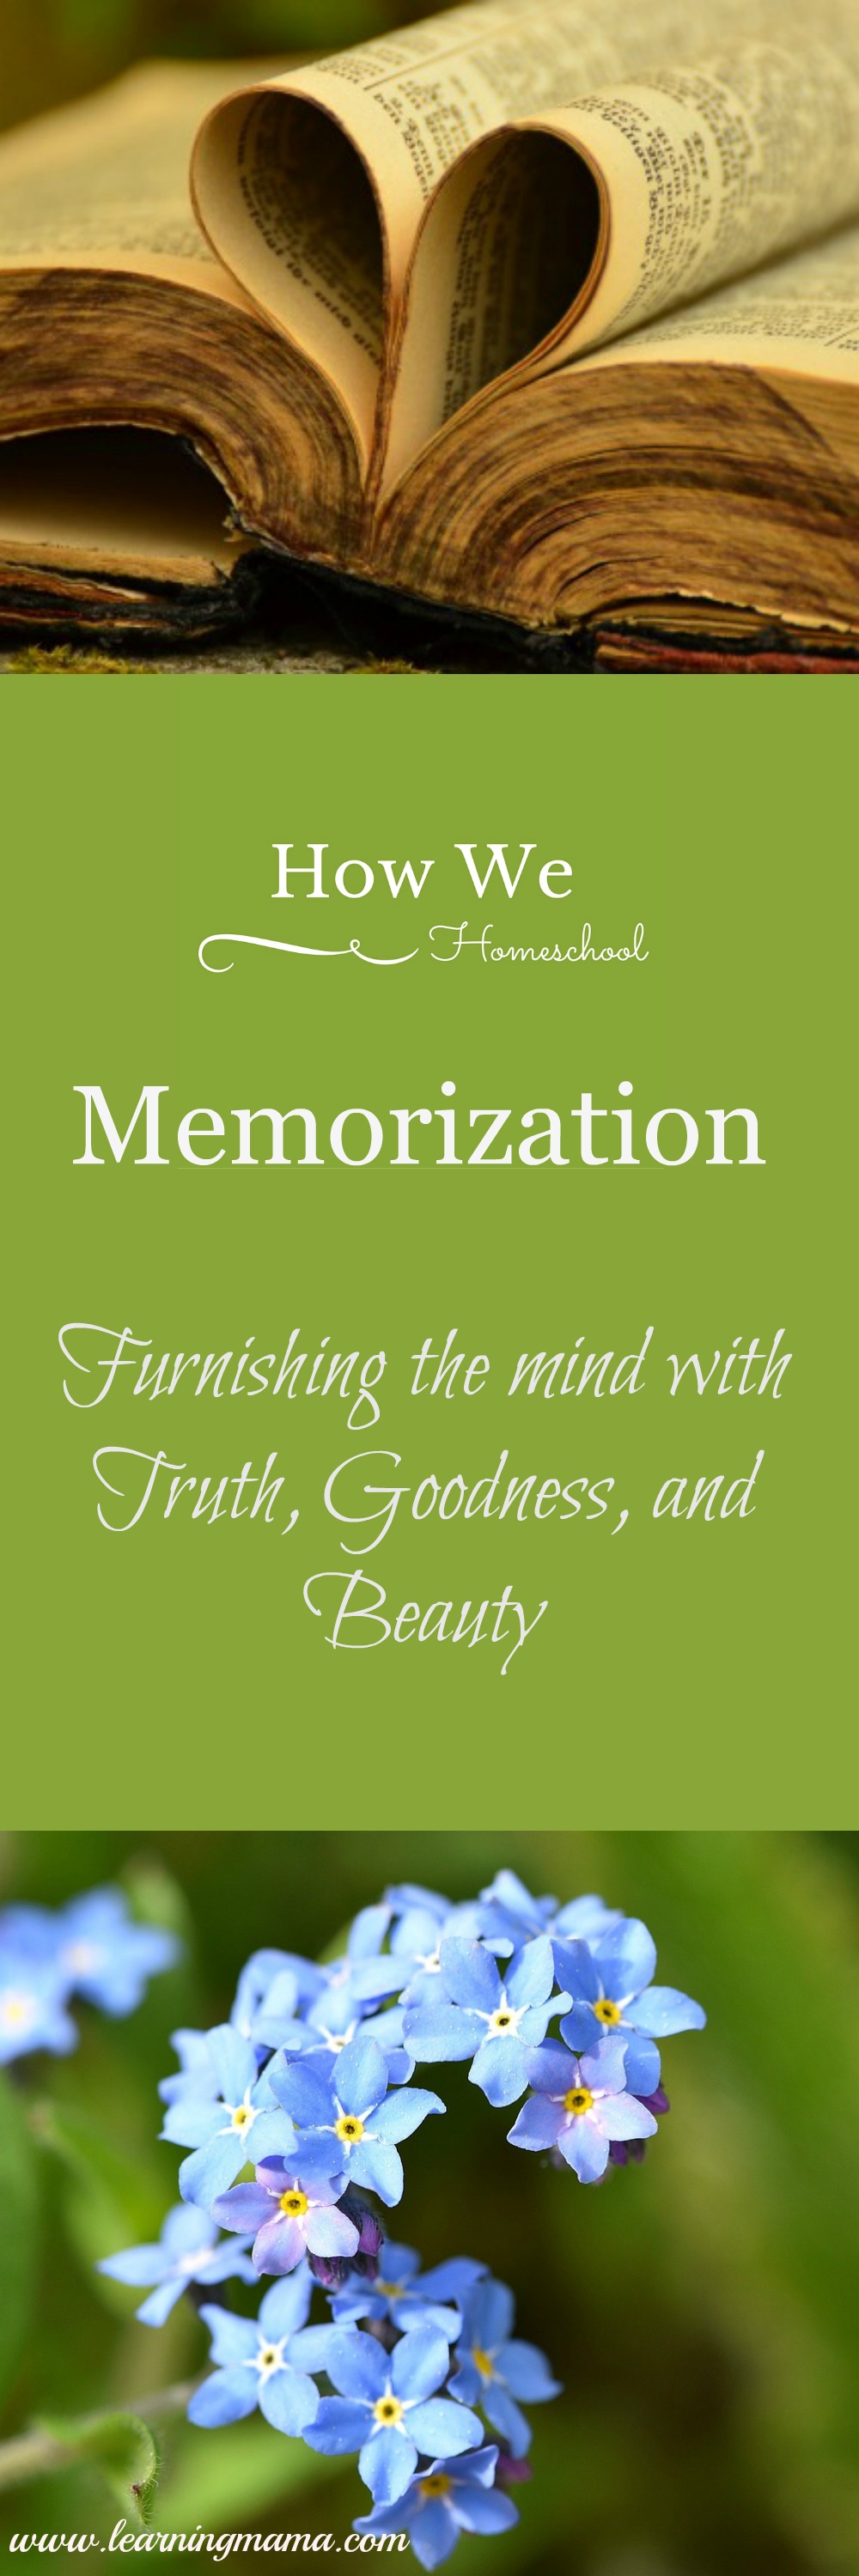 Memorization is NOT an antiquated or useless educational method! Memorization furnishes the mind with valuable ideas